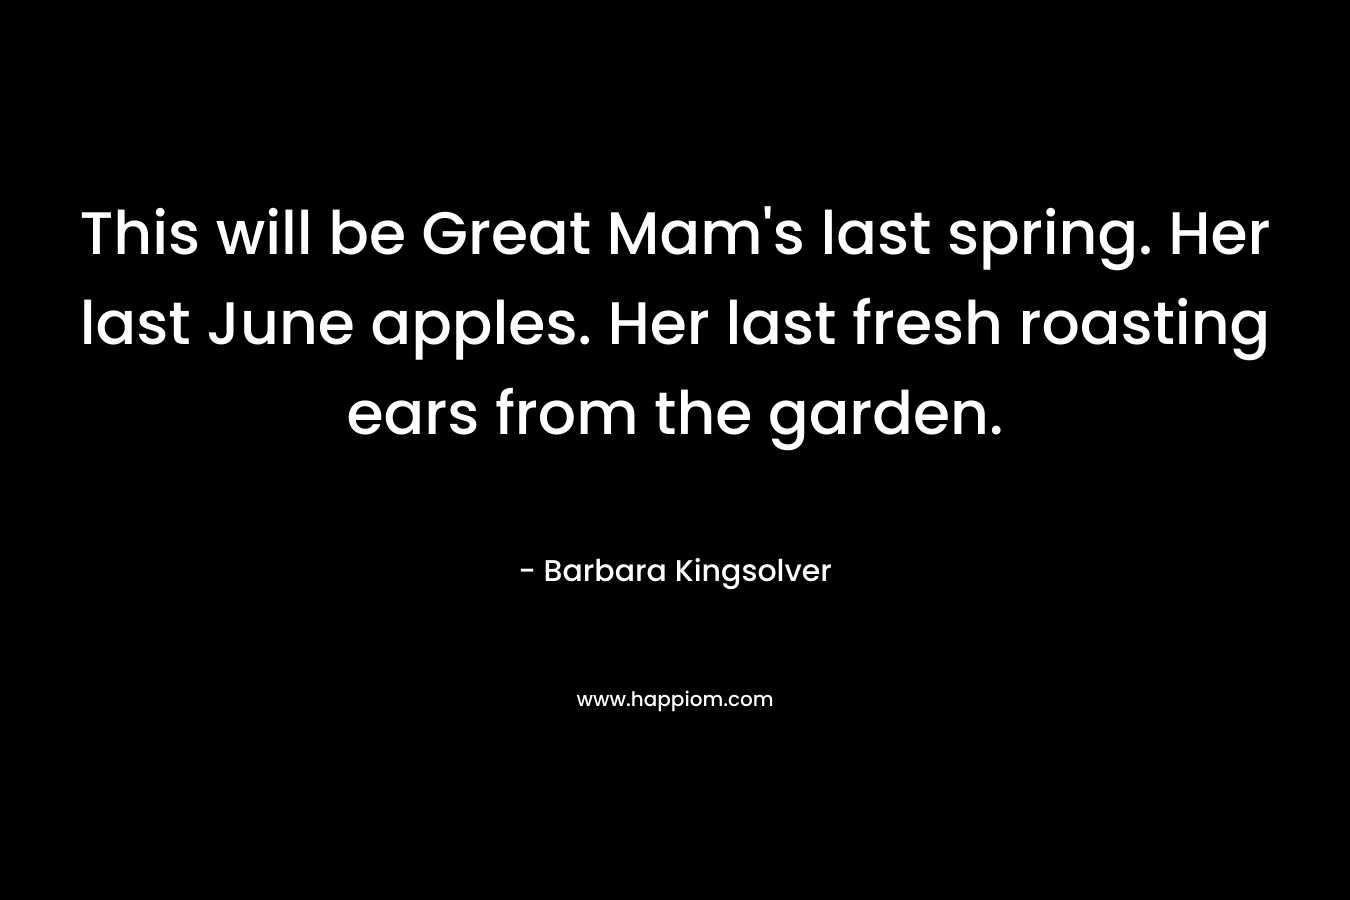 This will be Great Mam’s last spring. Her last June apples. Her last fresh roasting ears from the garden. – Barbara Kingsolver